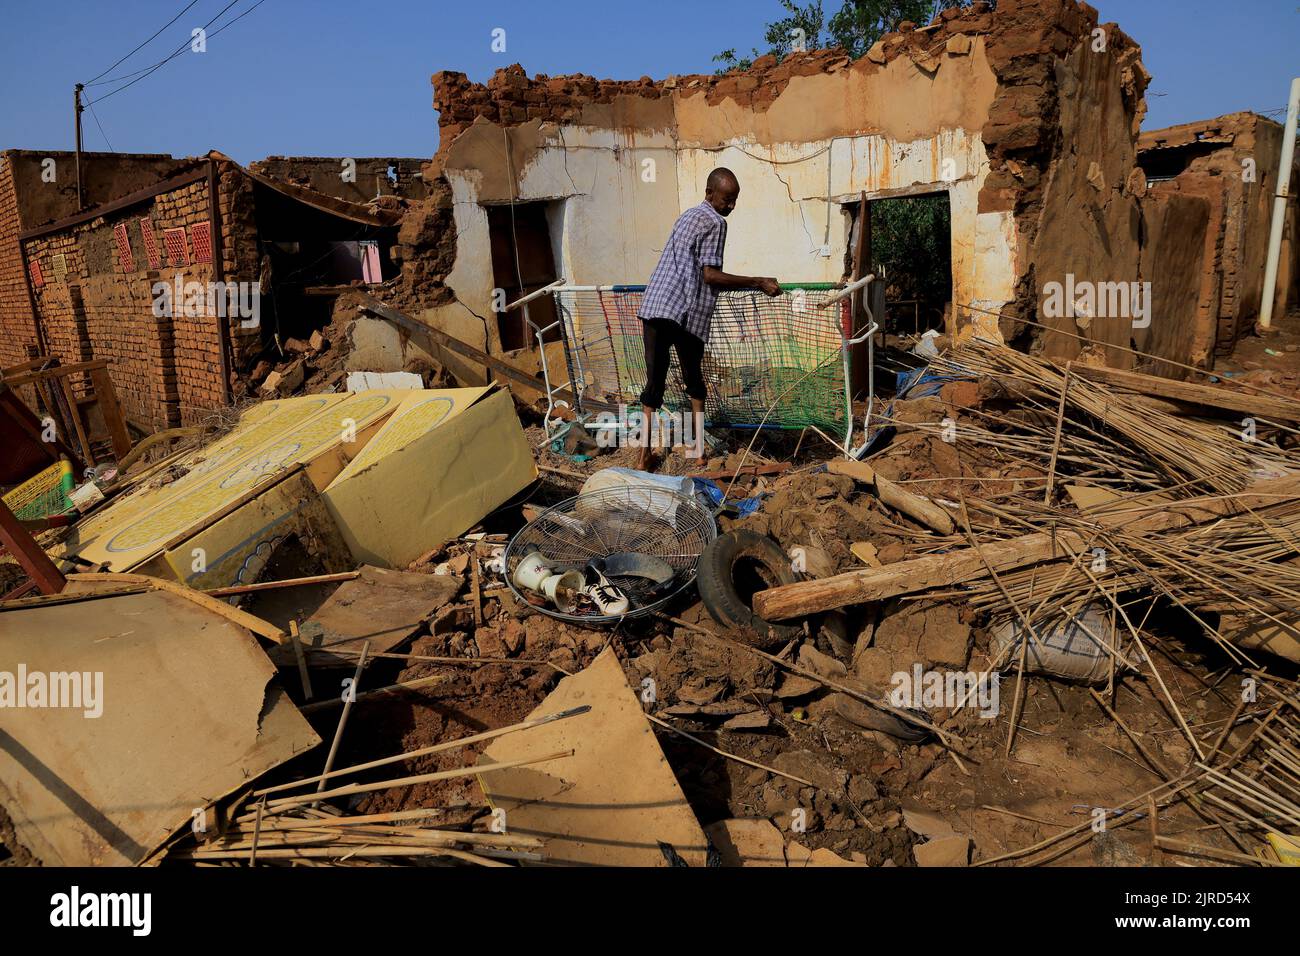 A man collects his belongings after sustaining water damage to his house during floods in Al-Managil locality, in Jazeera State, Sudan August 23, 2022. REUTERS/Mohamed Nureldin Abdallah Stock Photo